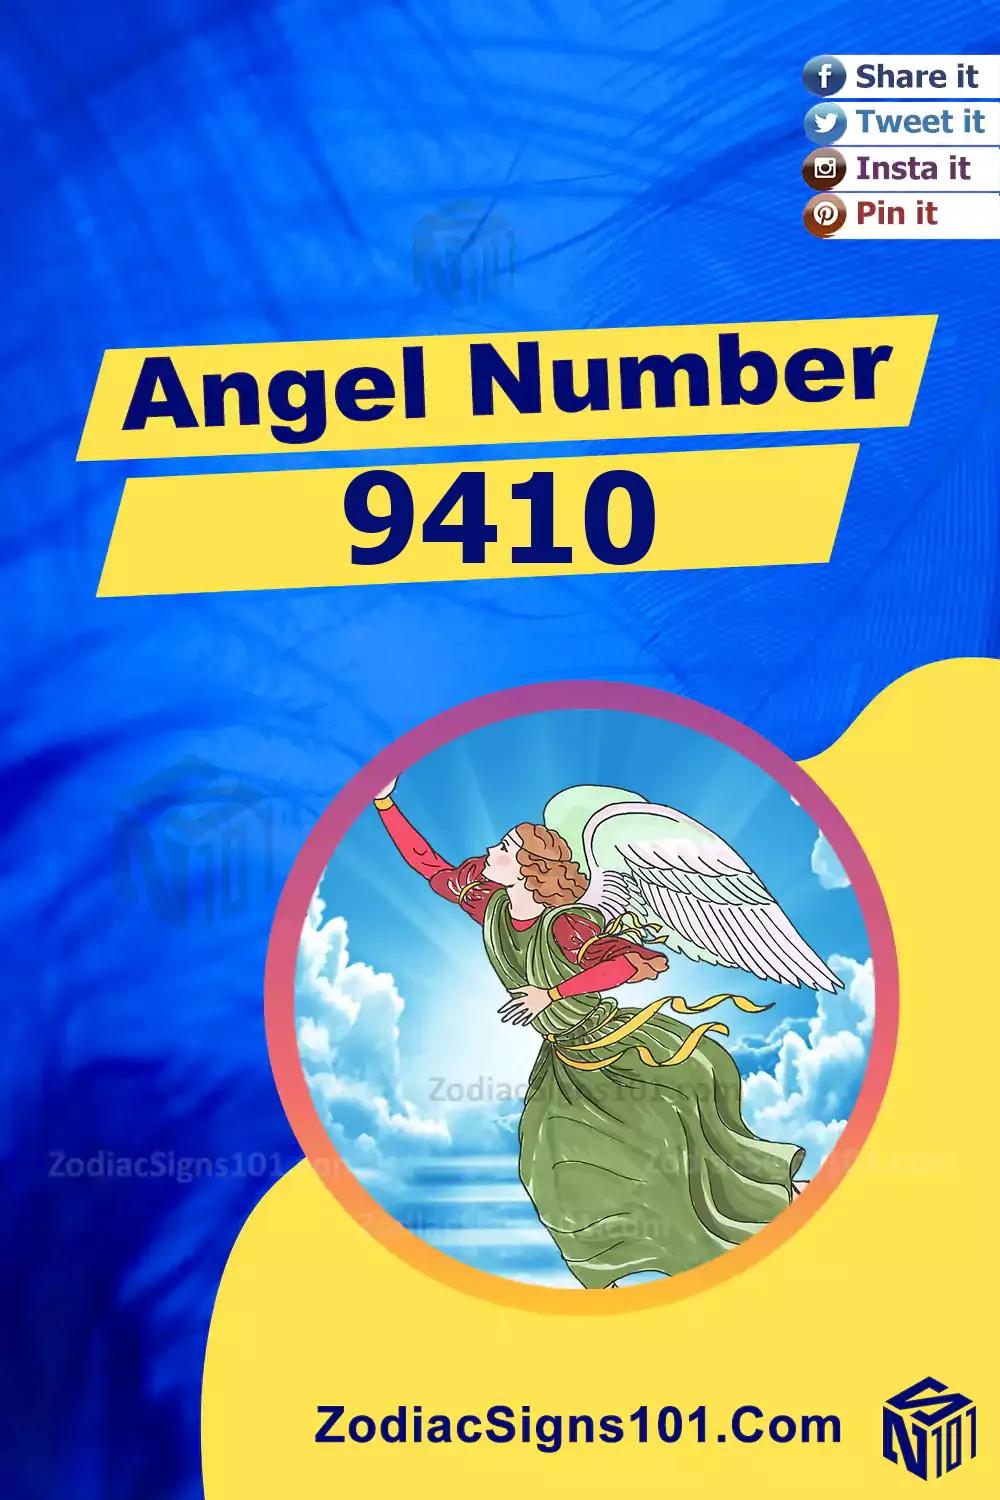 9410 Angel Number Meaning